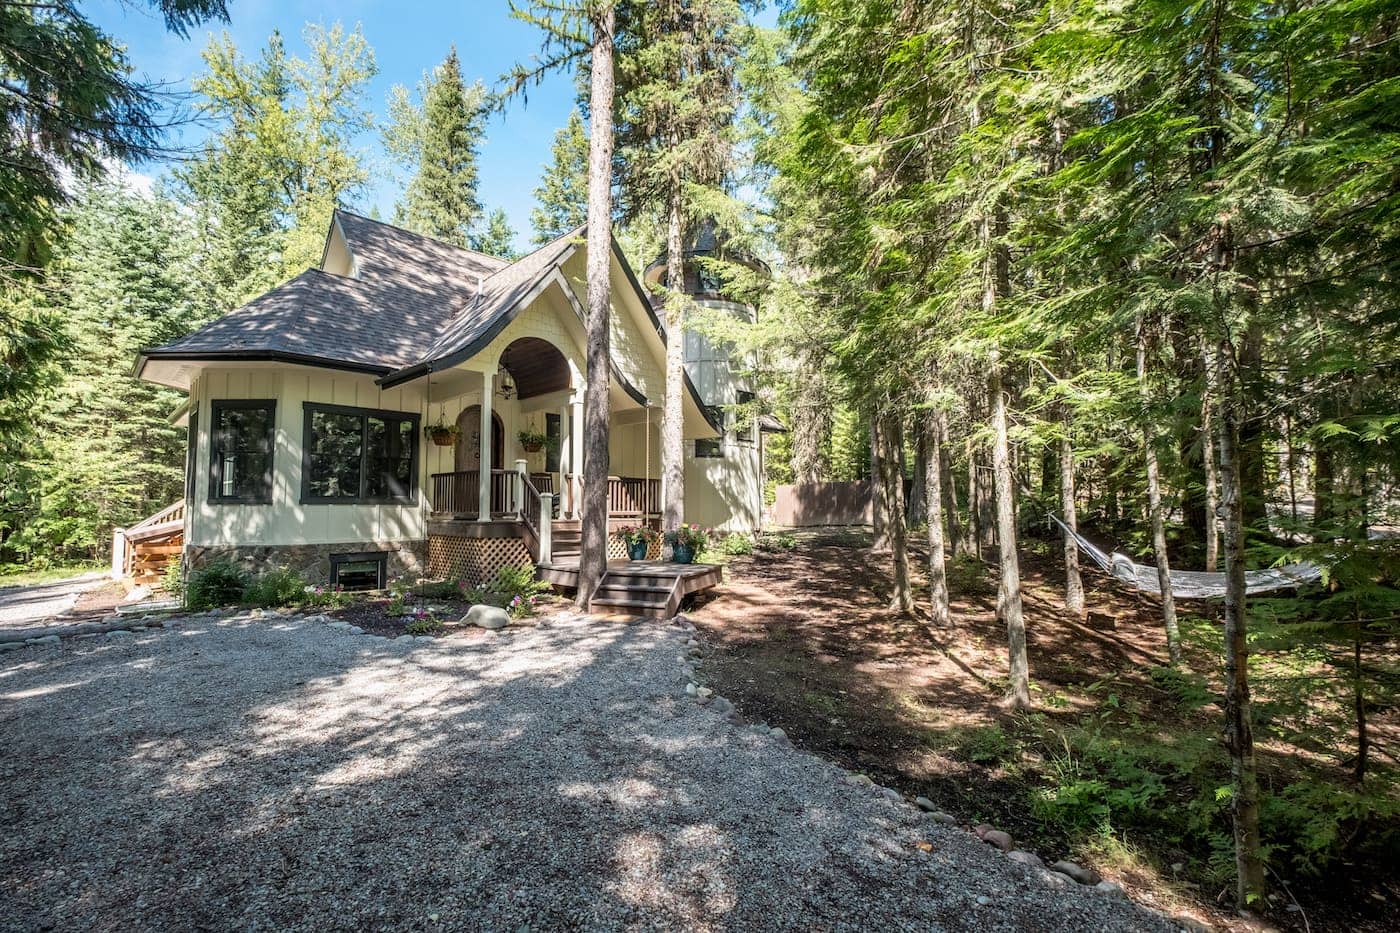 Welcome To Glacier Bear Retreat, An Exclusive Luxury Vacation Rental Inside Glacier National Park!